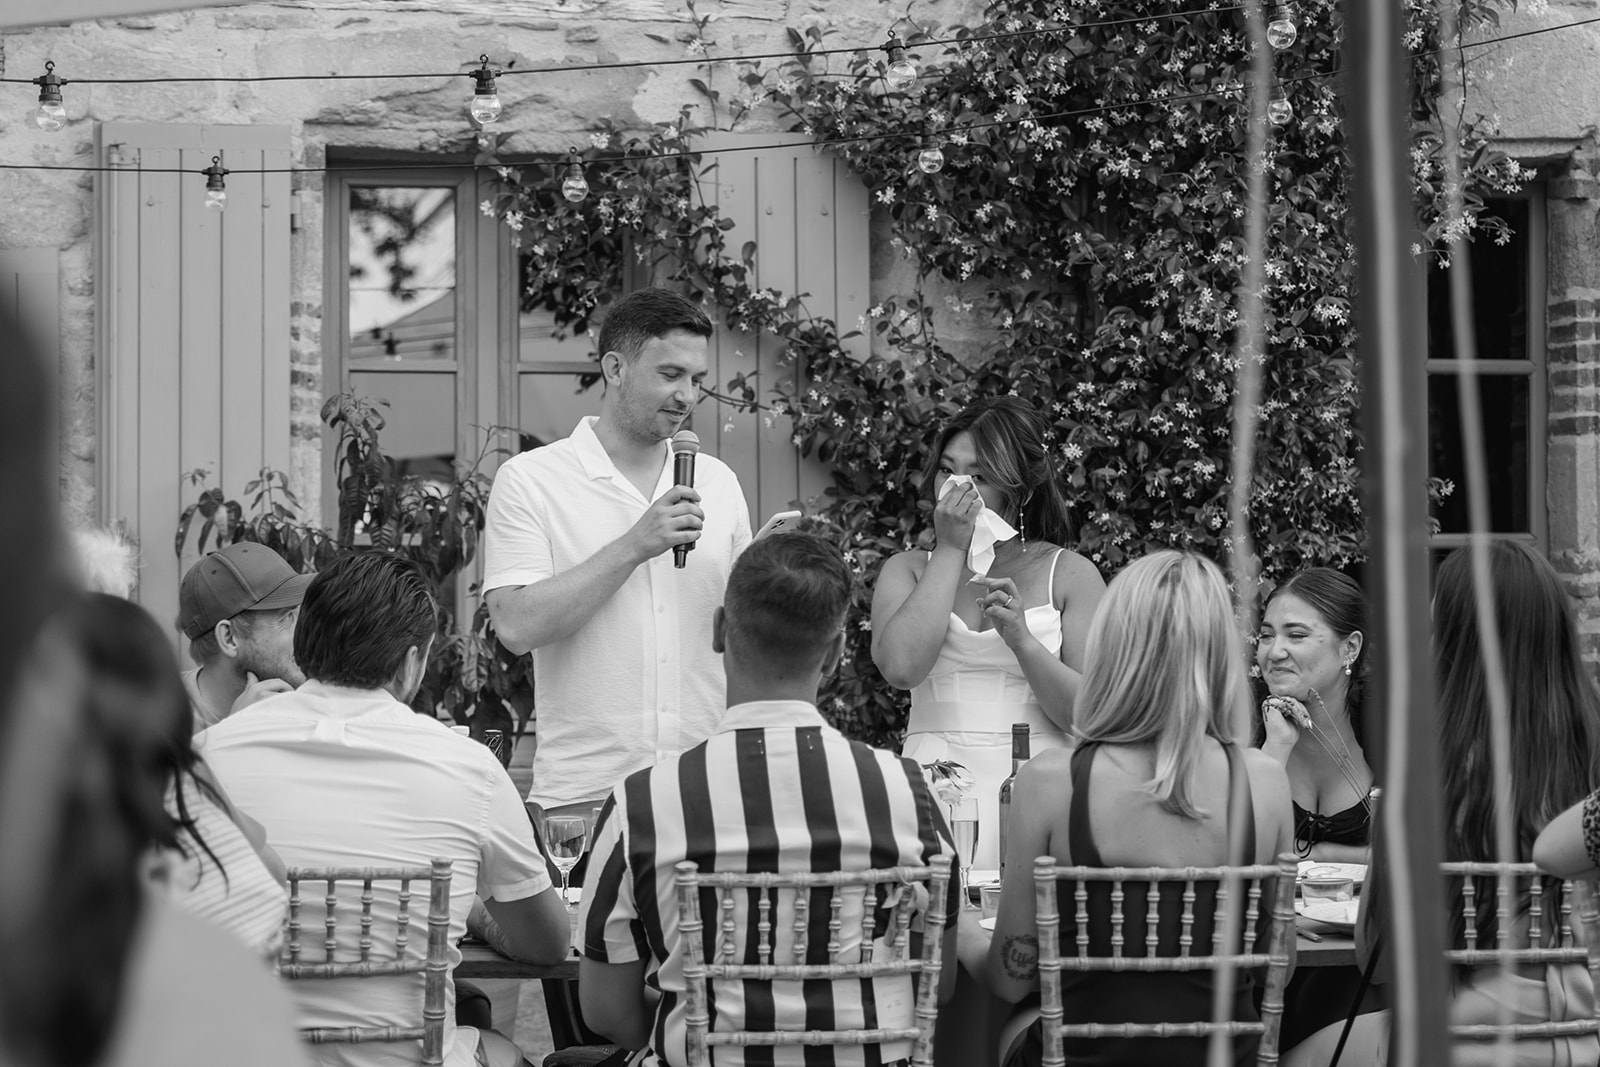 Reception speeches at a Destination Wedding in France. Photography & Videography by OliveJoy Photography